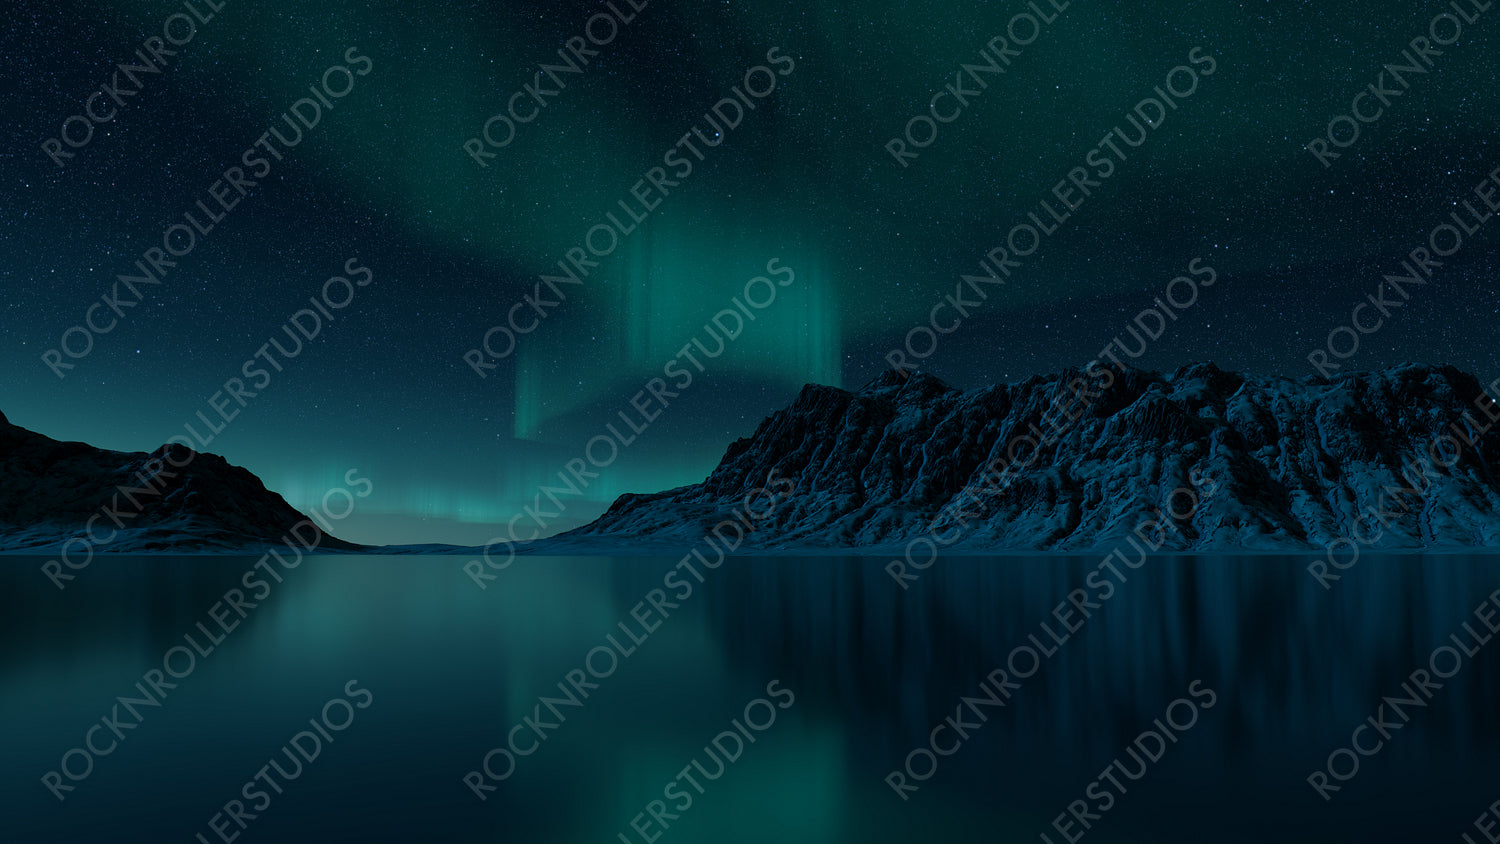 Green Aurora Borealis over Snow covered Terrain. Magical Northern Lights Banner with copy-space.